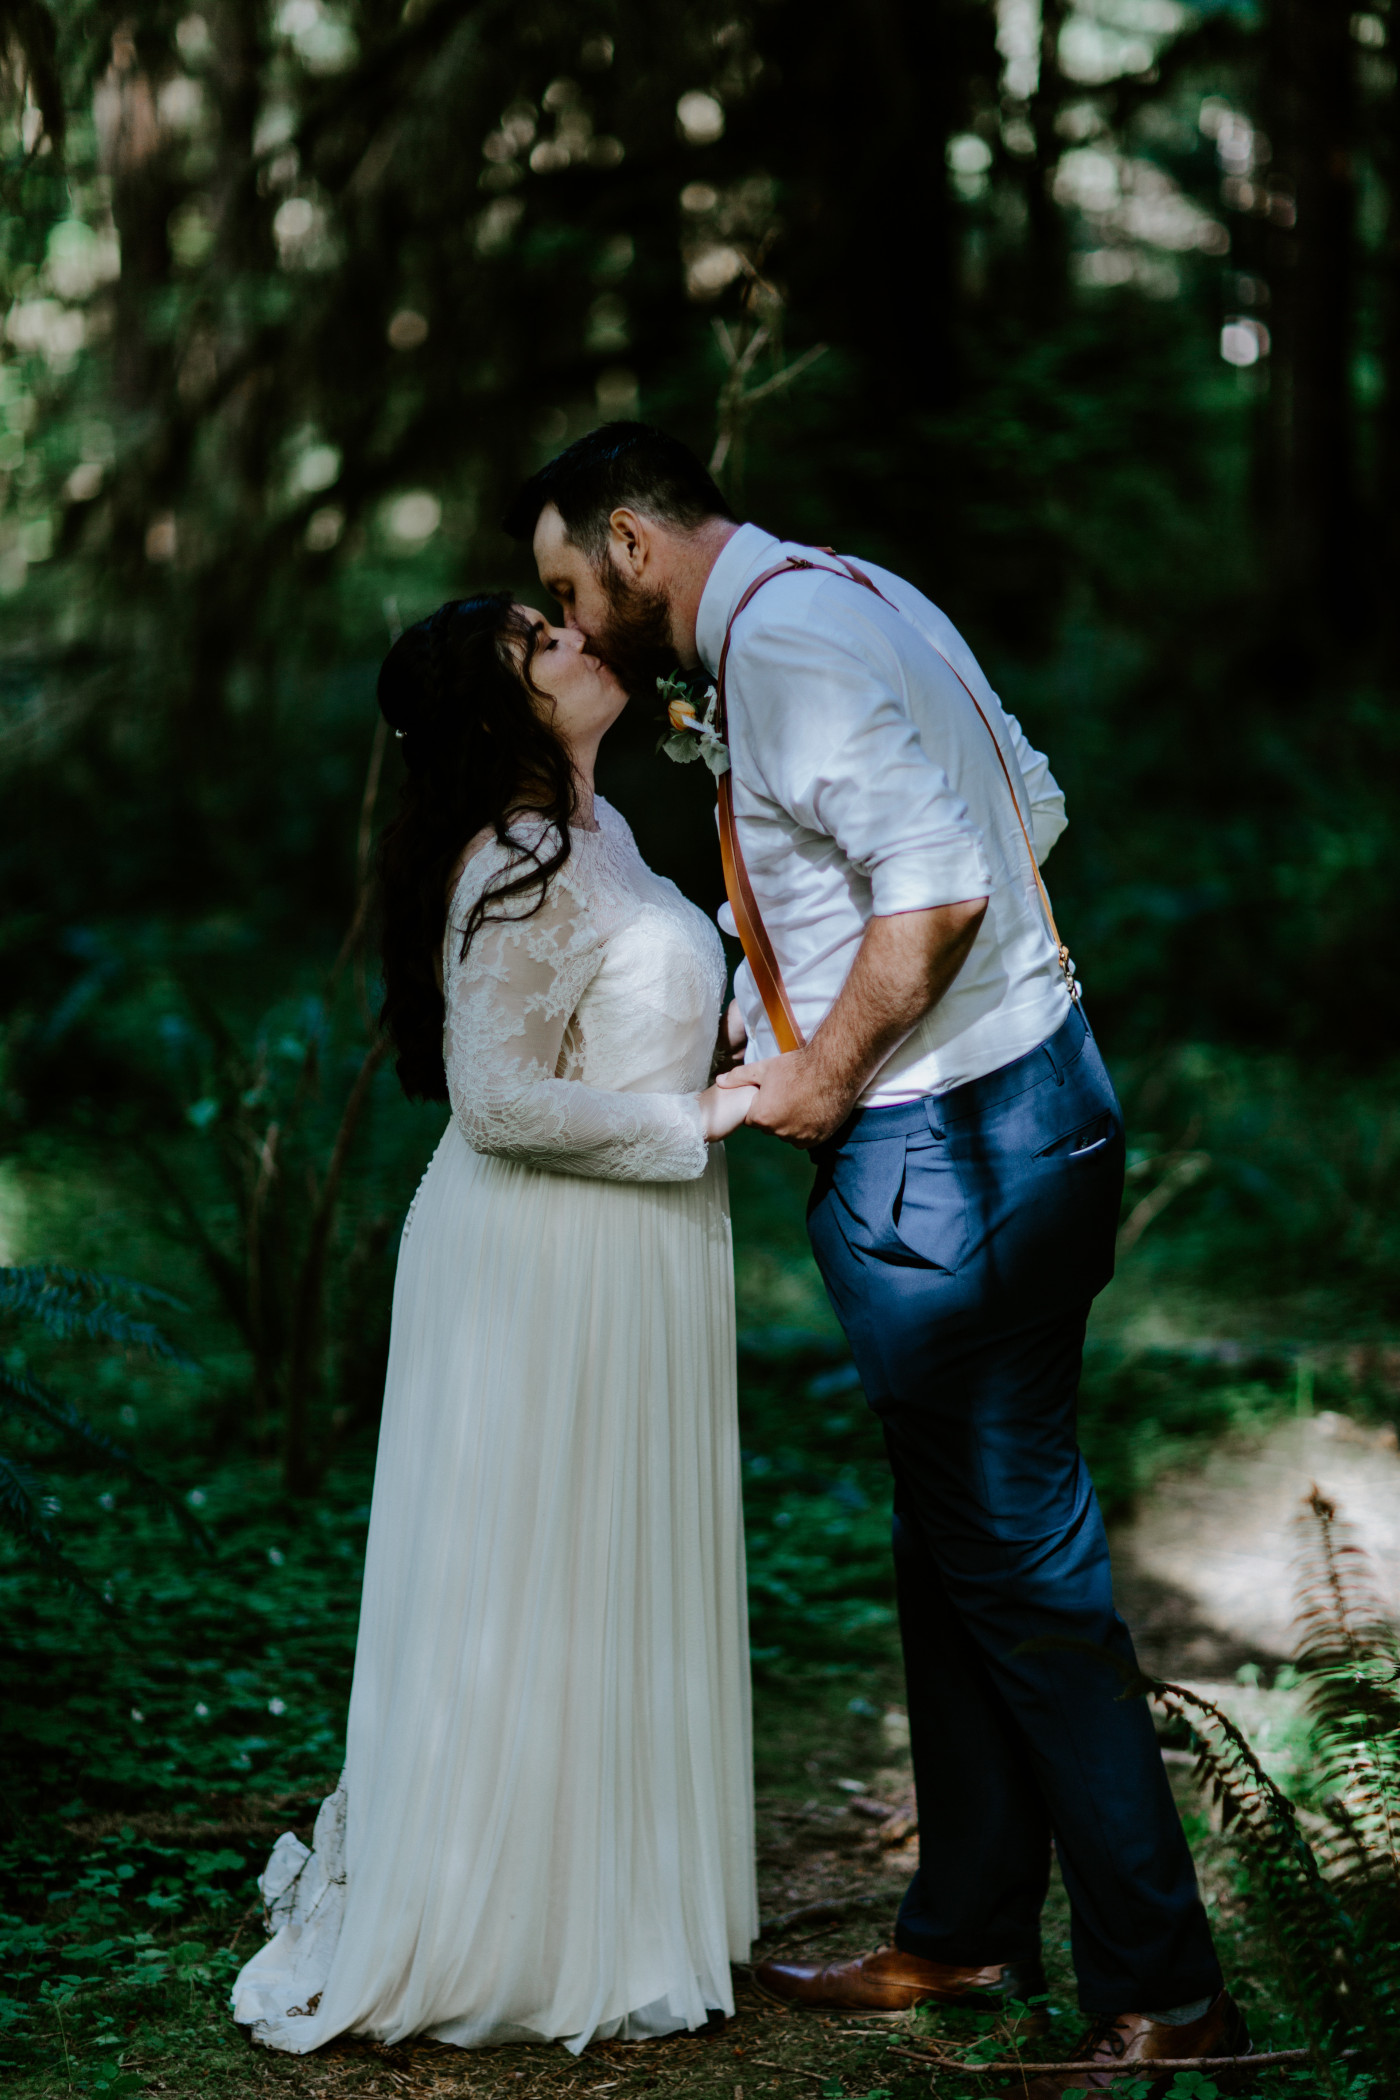 Jack and Brooke kiss. Elopement photography at Olympic National Park by Sienna Plus Josh.